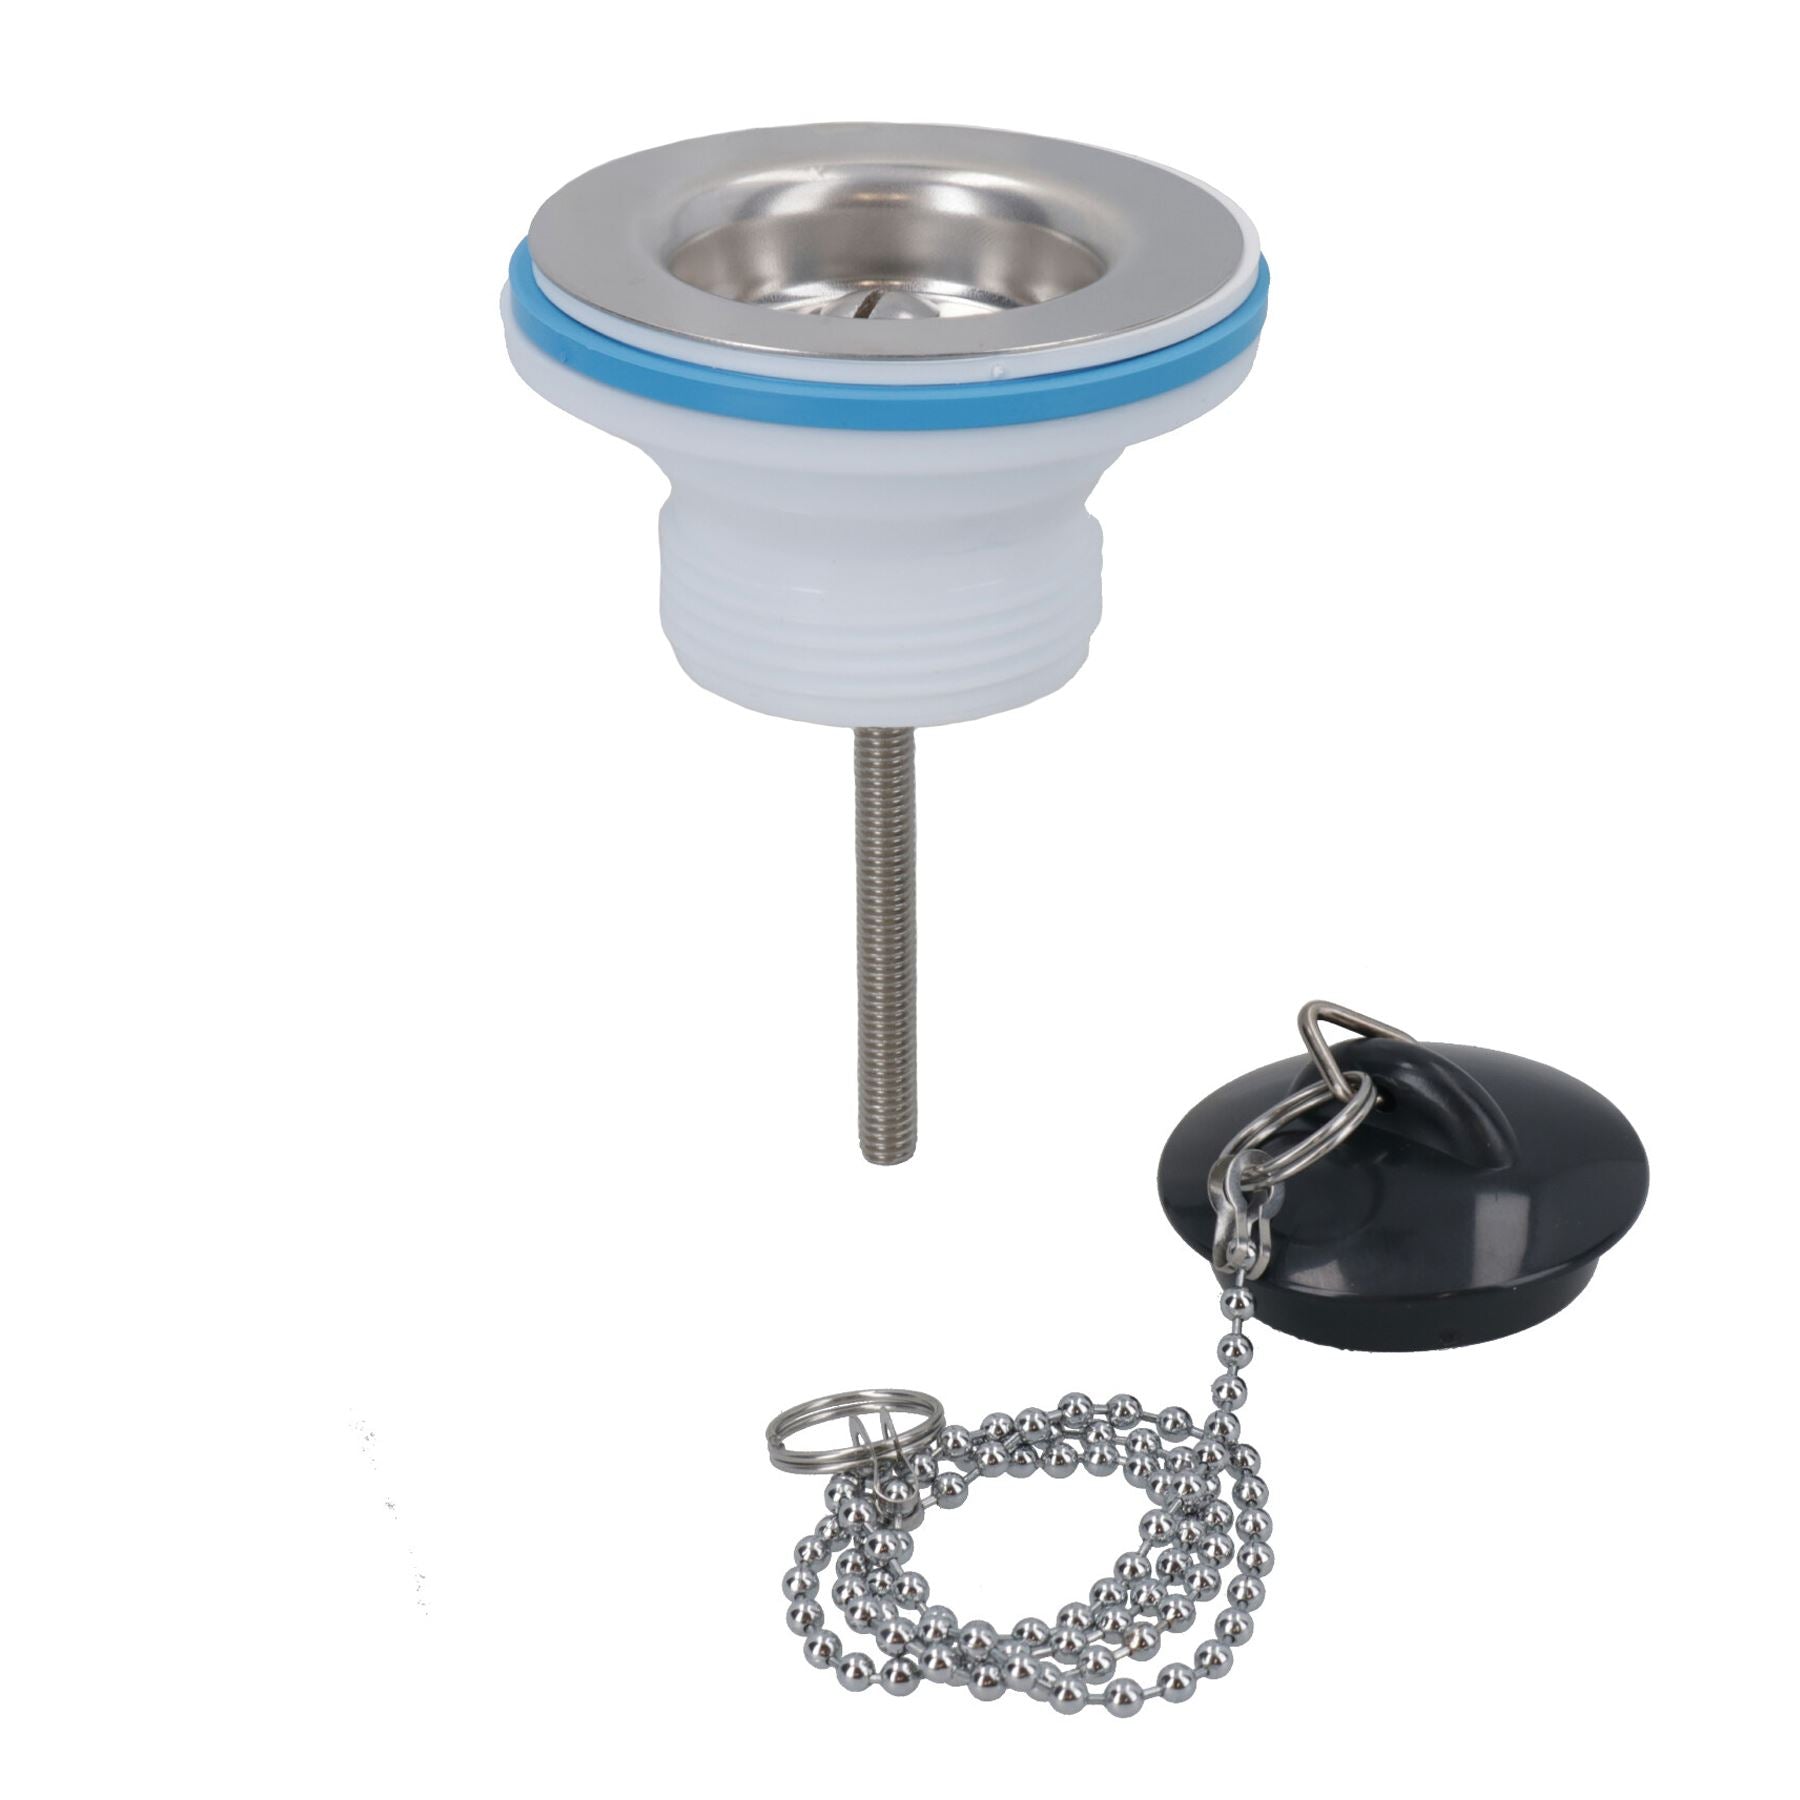 1-1/4in. Kitchen Sink Strainer Waste Complete With Plug + Chain + Fixing Bolt